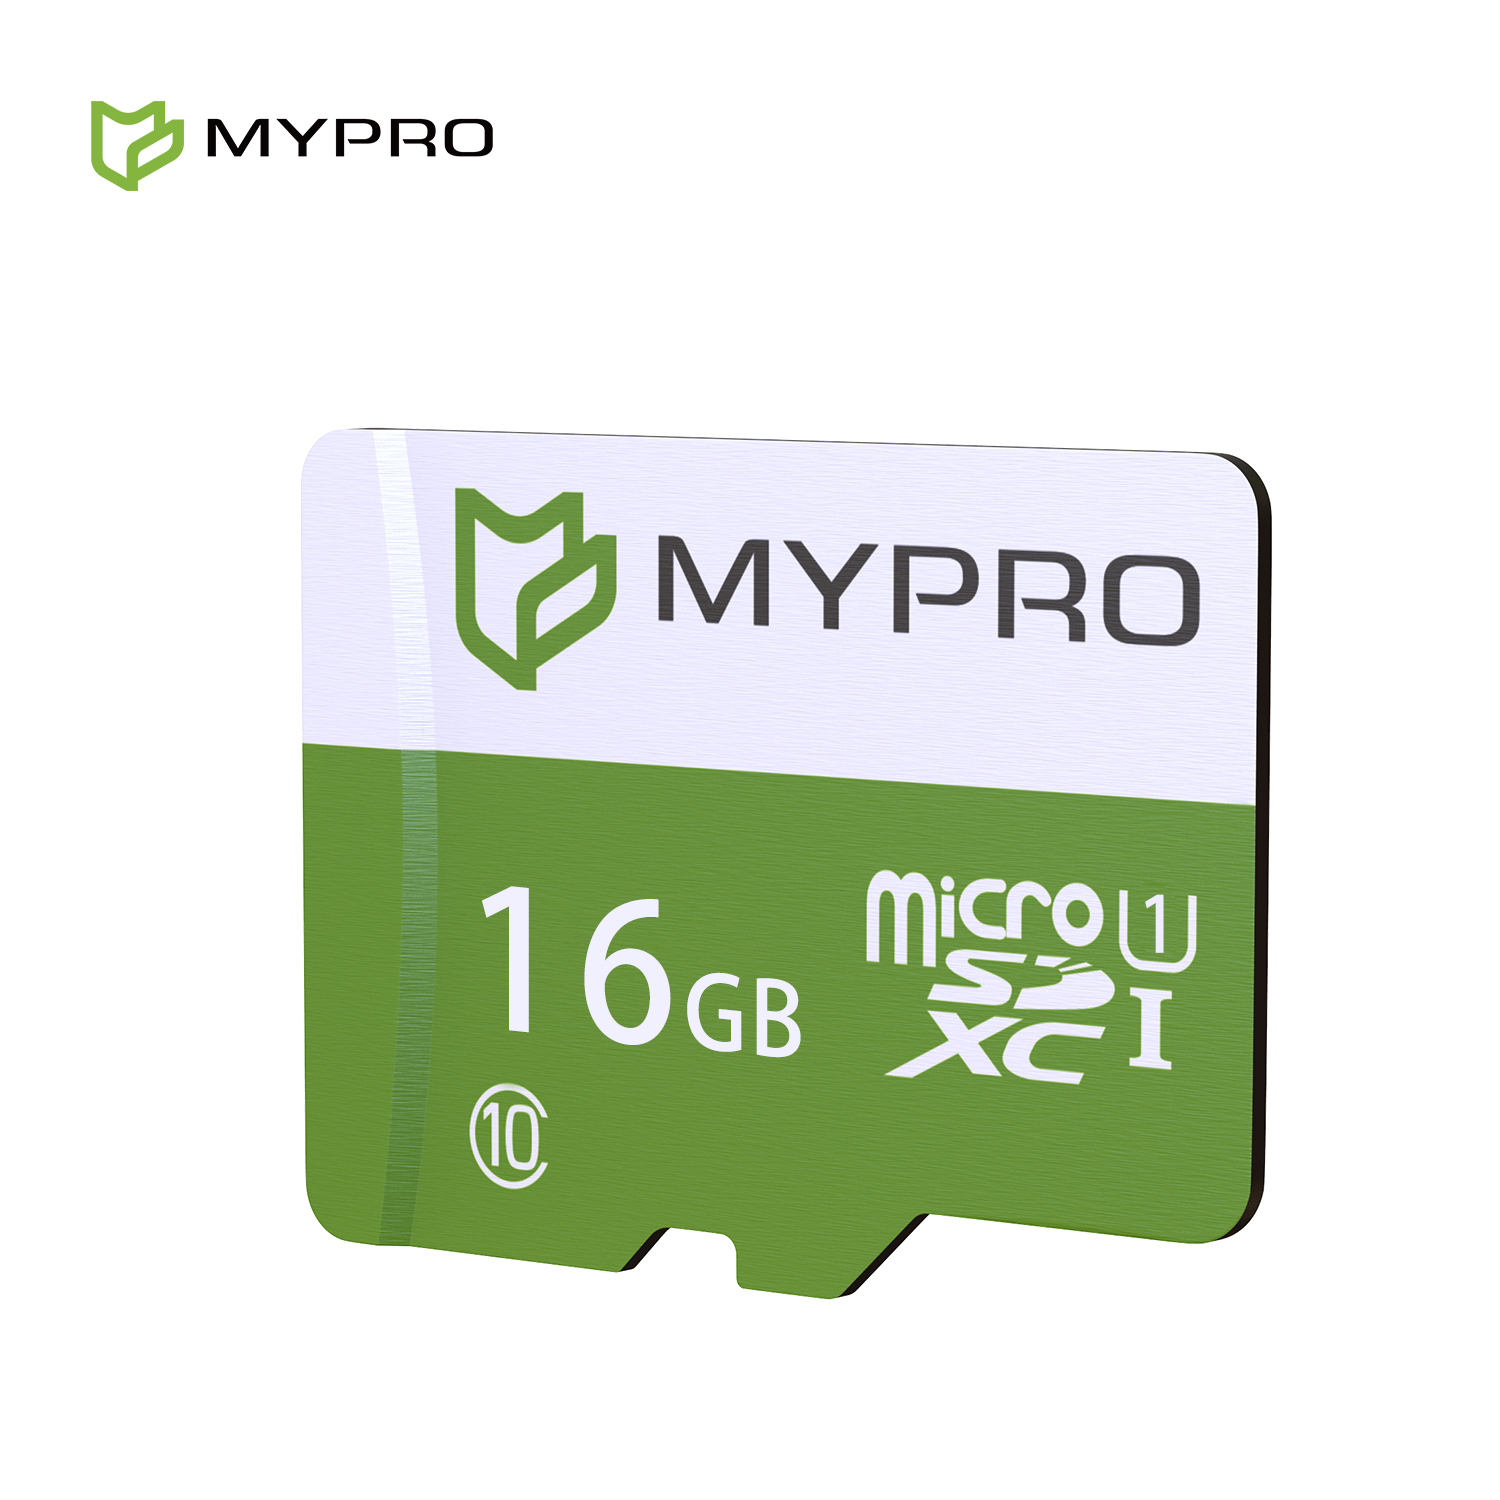 Buy Micro Sd Cards At Best Price Online Lazada Com Ph